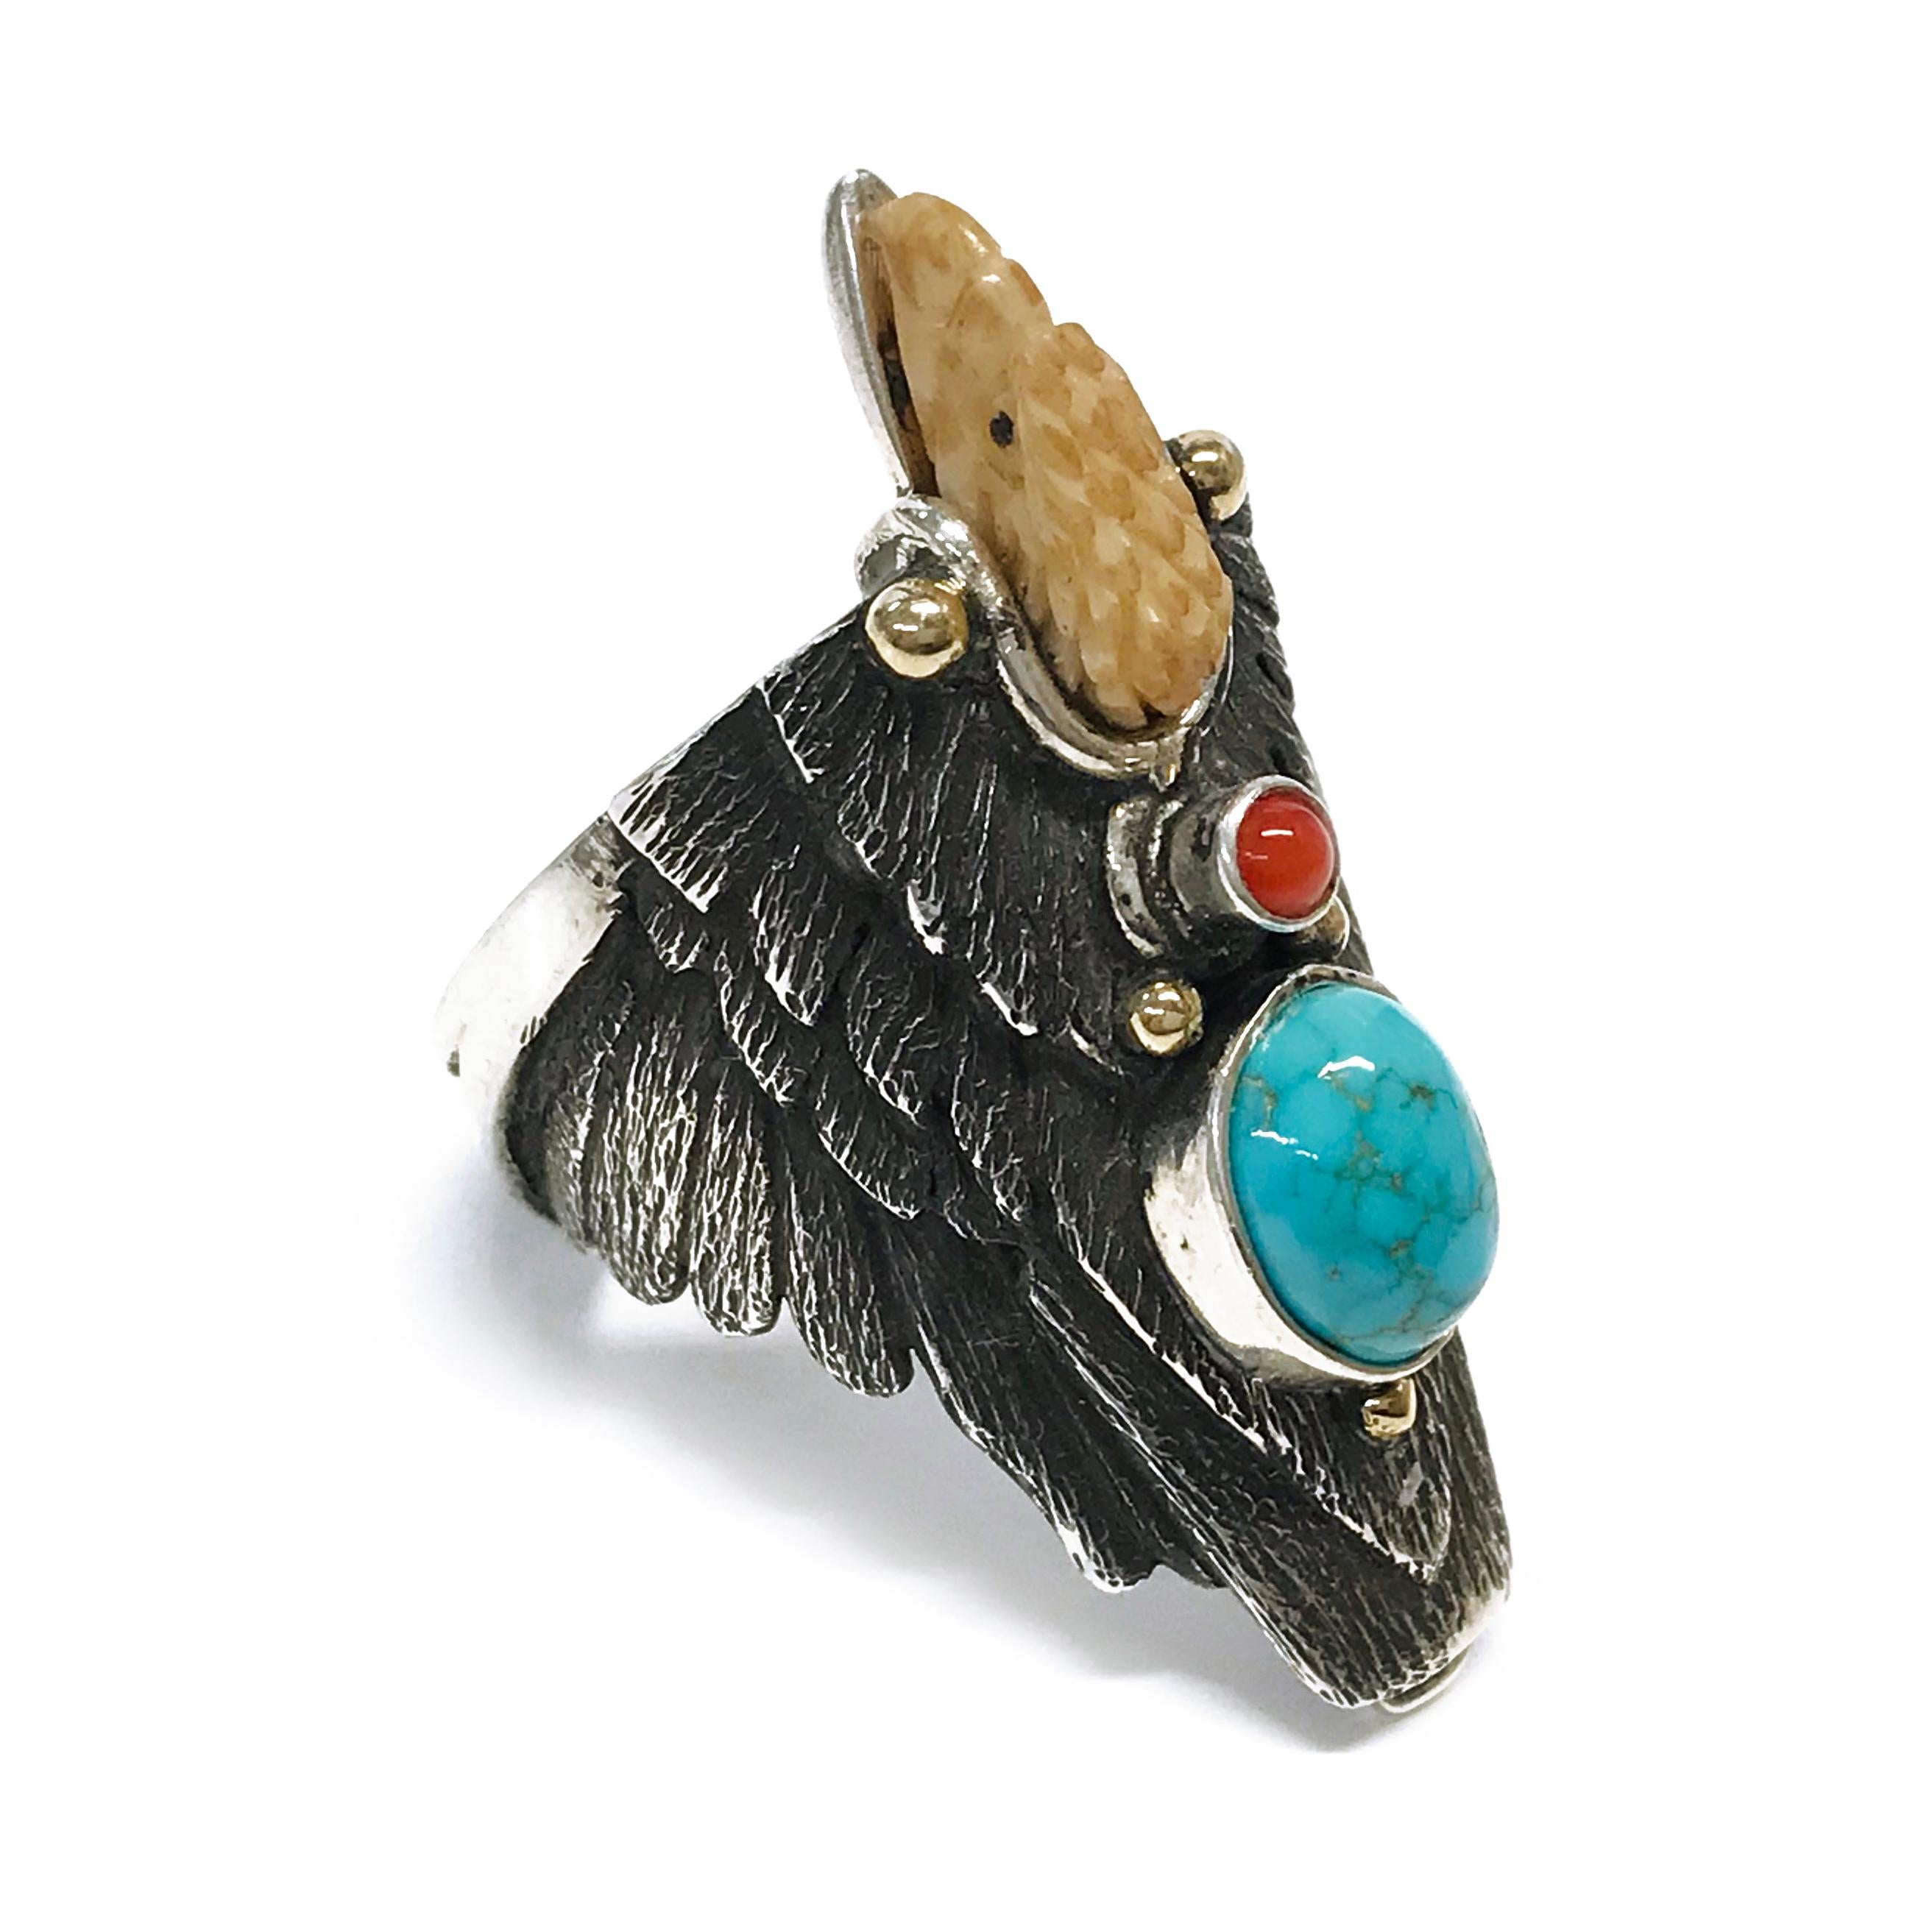 Handcrafted from Sterling Silver with 14k accents by jewelry maker, Ray Winner. This absolutely glorious ring features a natural Blue Carico Lake Turquoise oval cabochon and Mediterranean Coral round cabochon bezel set. The form of the ring band is